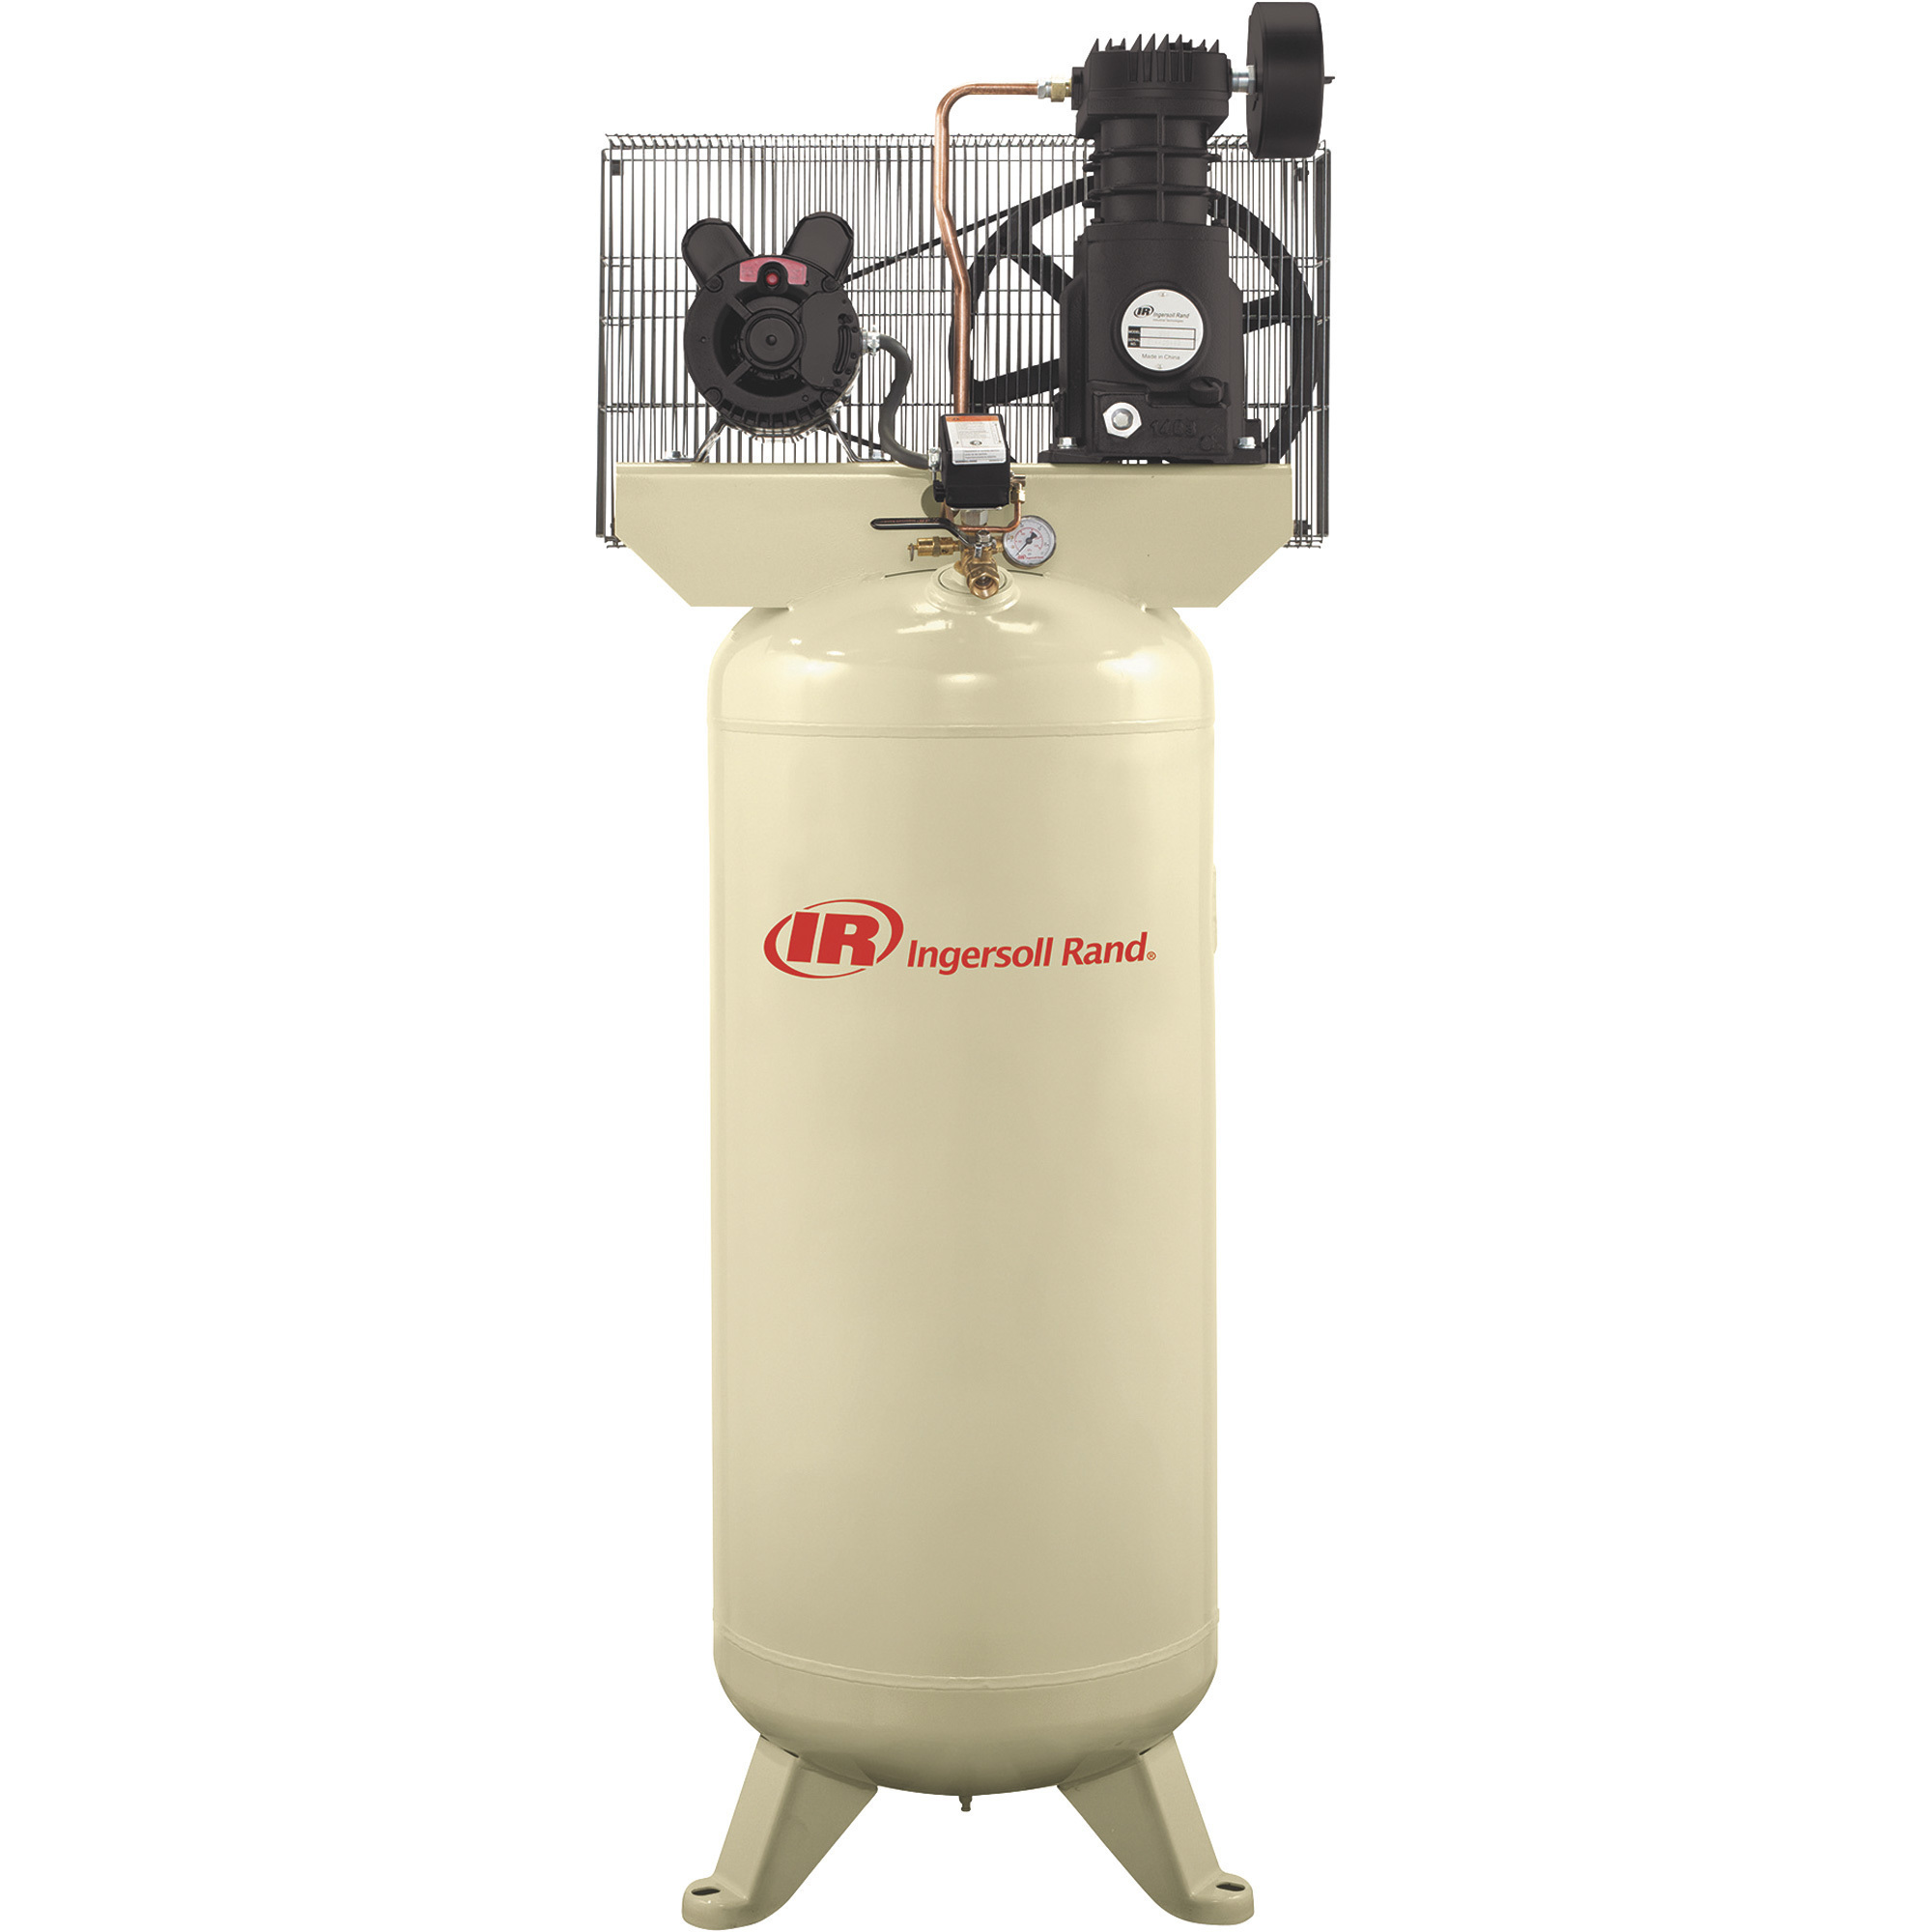 Ingersoll Rand Air Compressor - 5 HP, 230 Volt, 1-Phase, 60-Gallon Vertical, Electric Stationary, Model# SS5L5